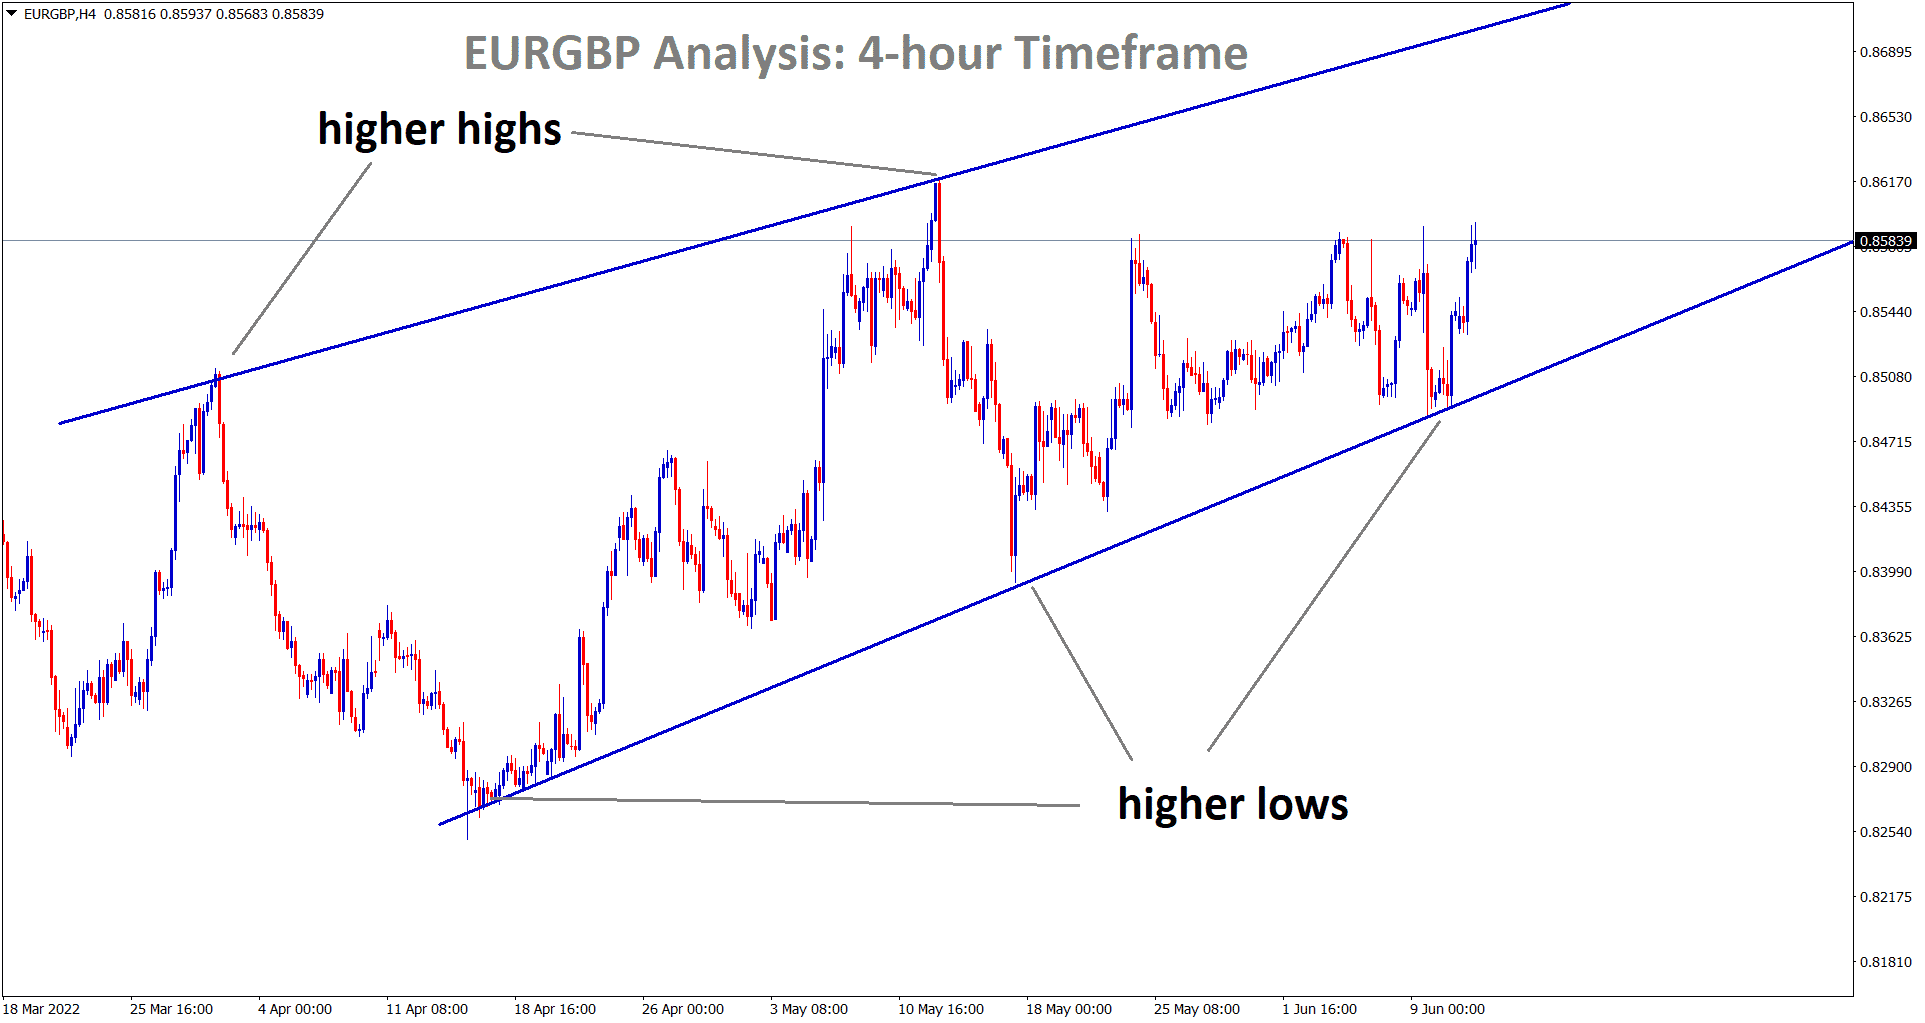 EURGBP is rebounding from the higher low area of the Ascending channel 1